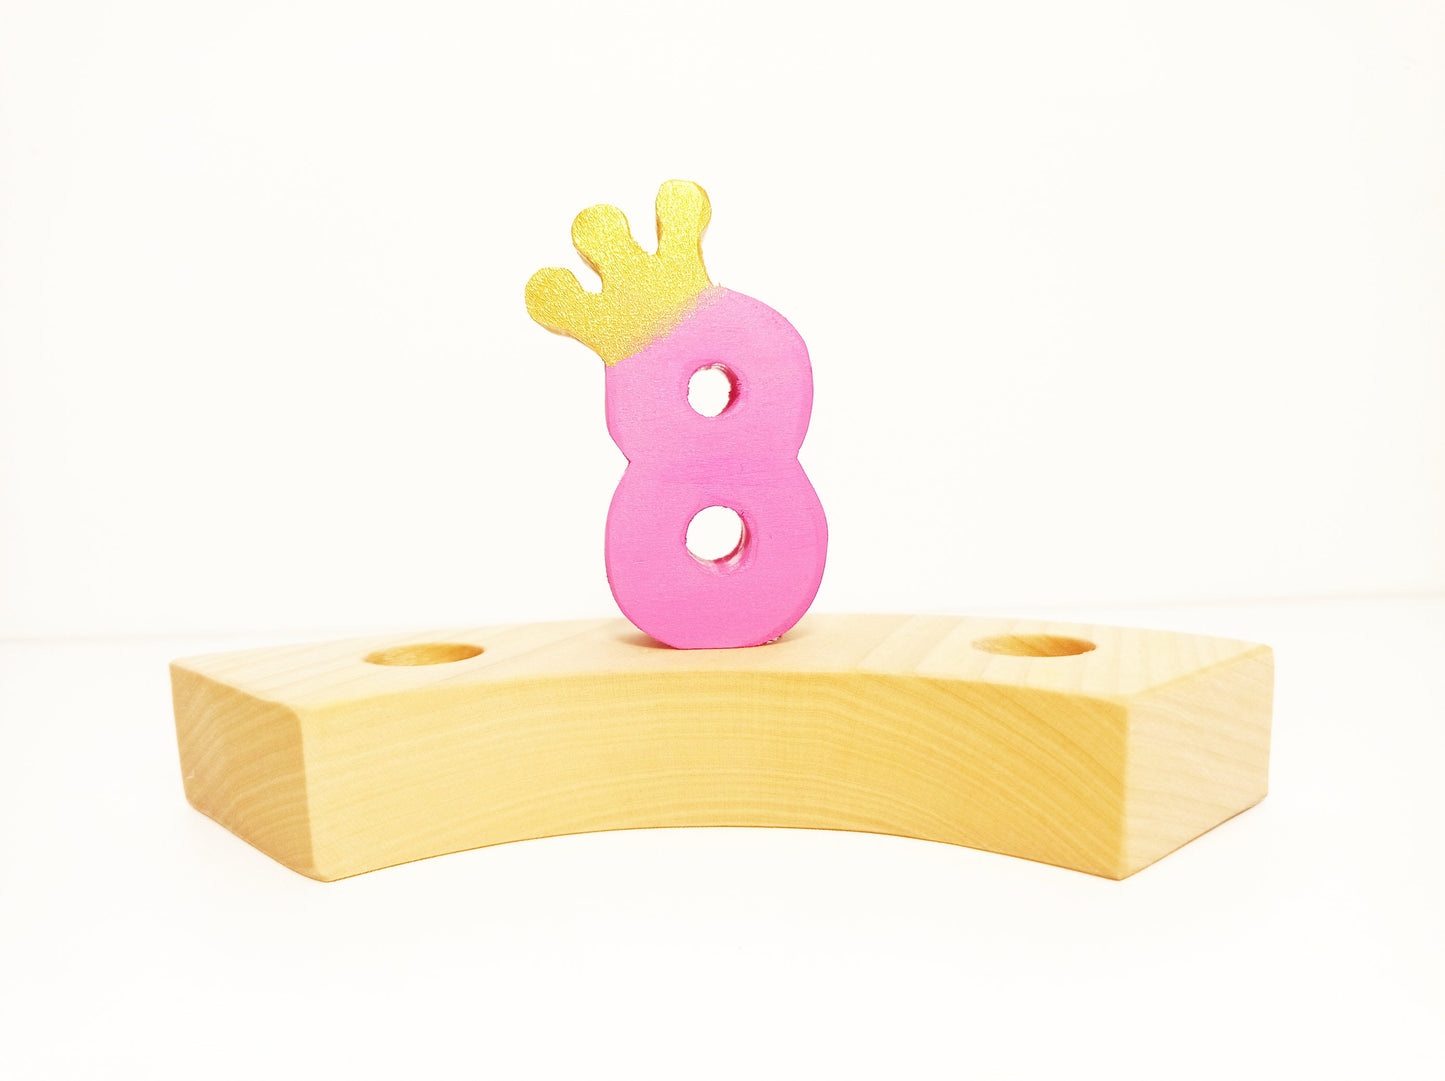 Number 8 birthday ring ornament, waldorf ring ornament, waldorf decoration, birthday ring, birthday decorations, waldorf numbers, jaar ring